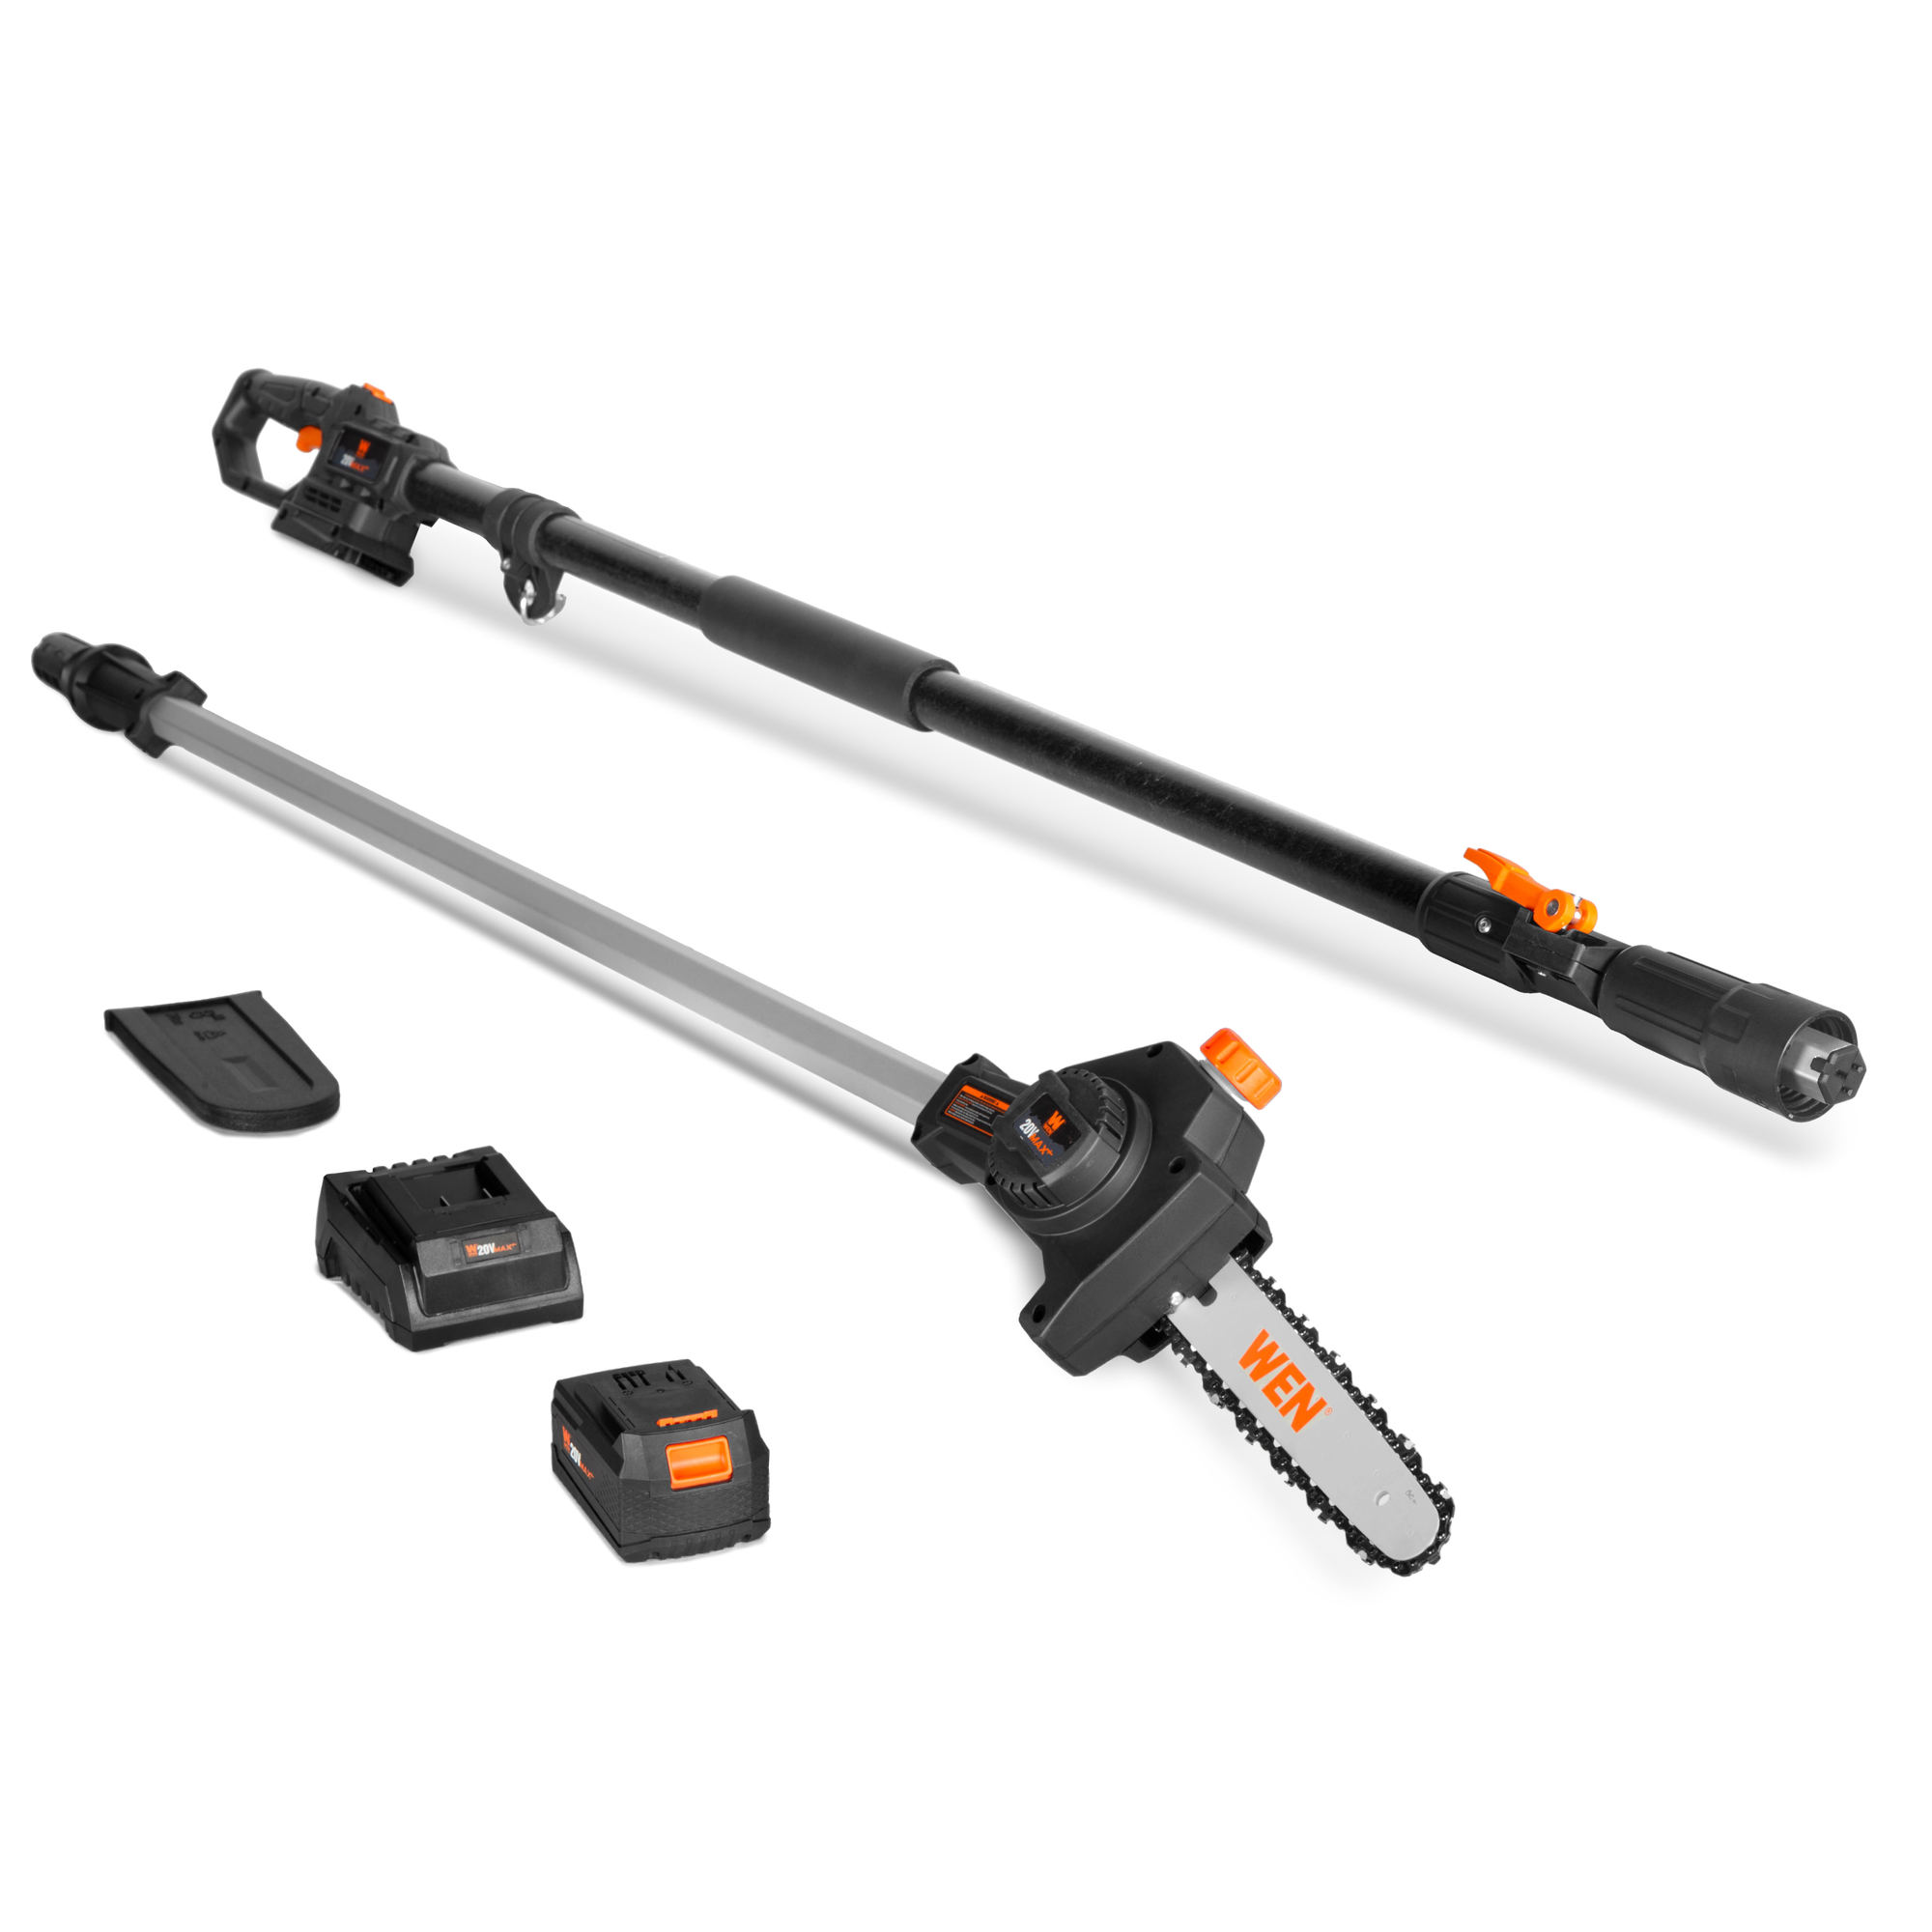 WEN, 20V Max Cordless Brushless 8Inch Pole Saw, Bar Length 8 in, Operating Height 17 ft, Model 20759